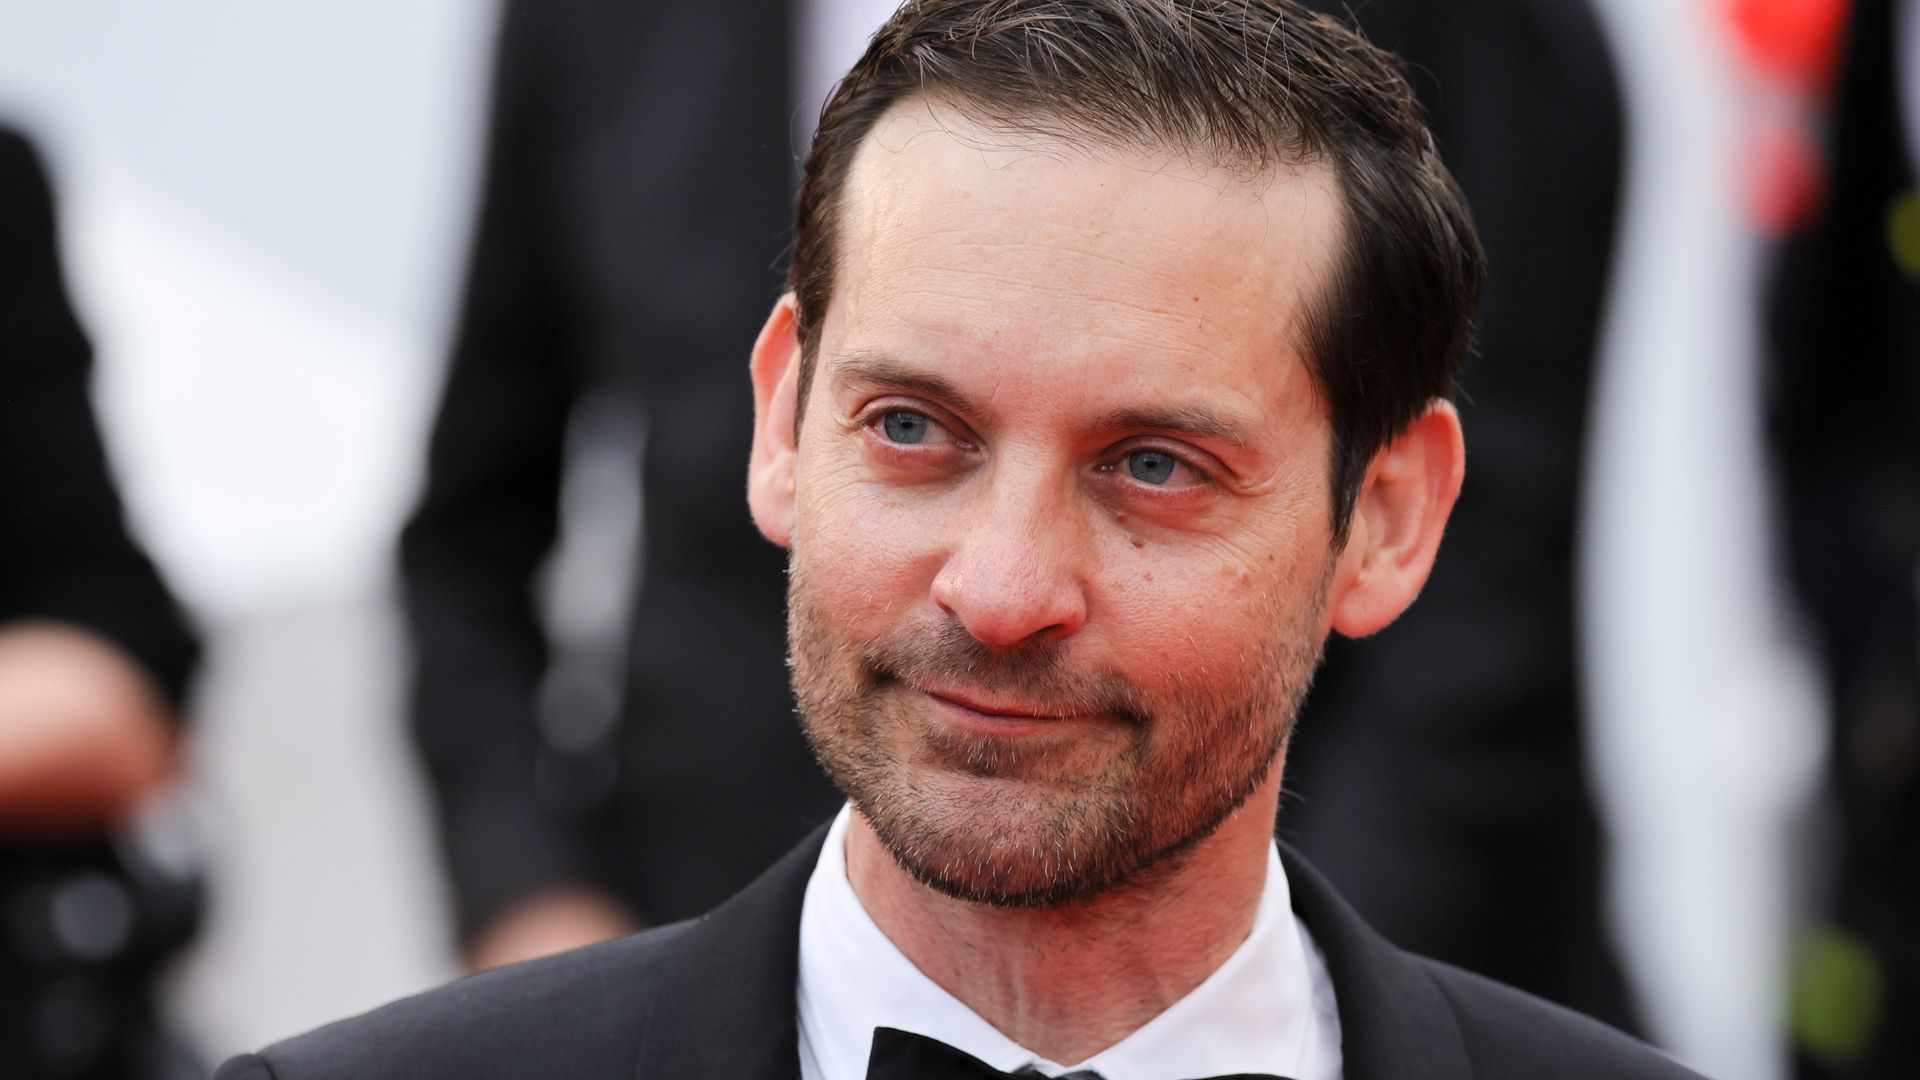 Tobey Maguire - Biography